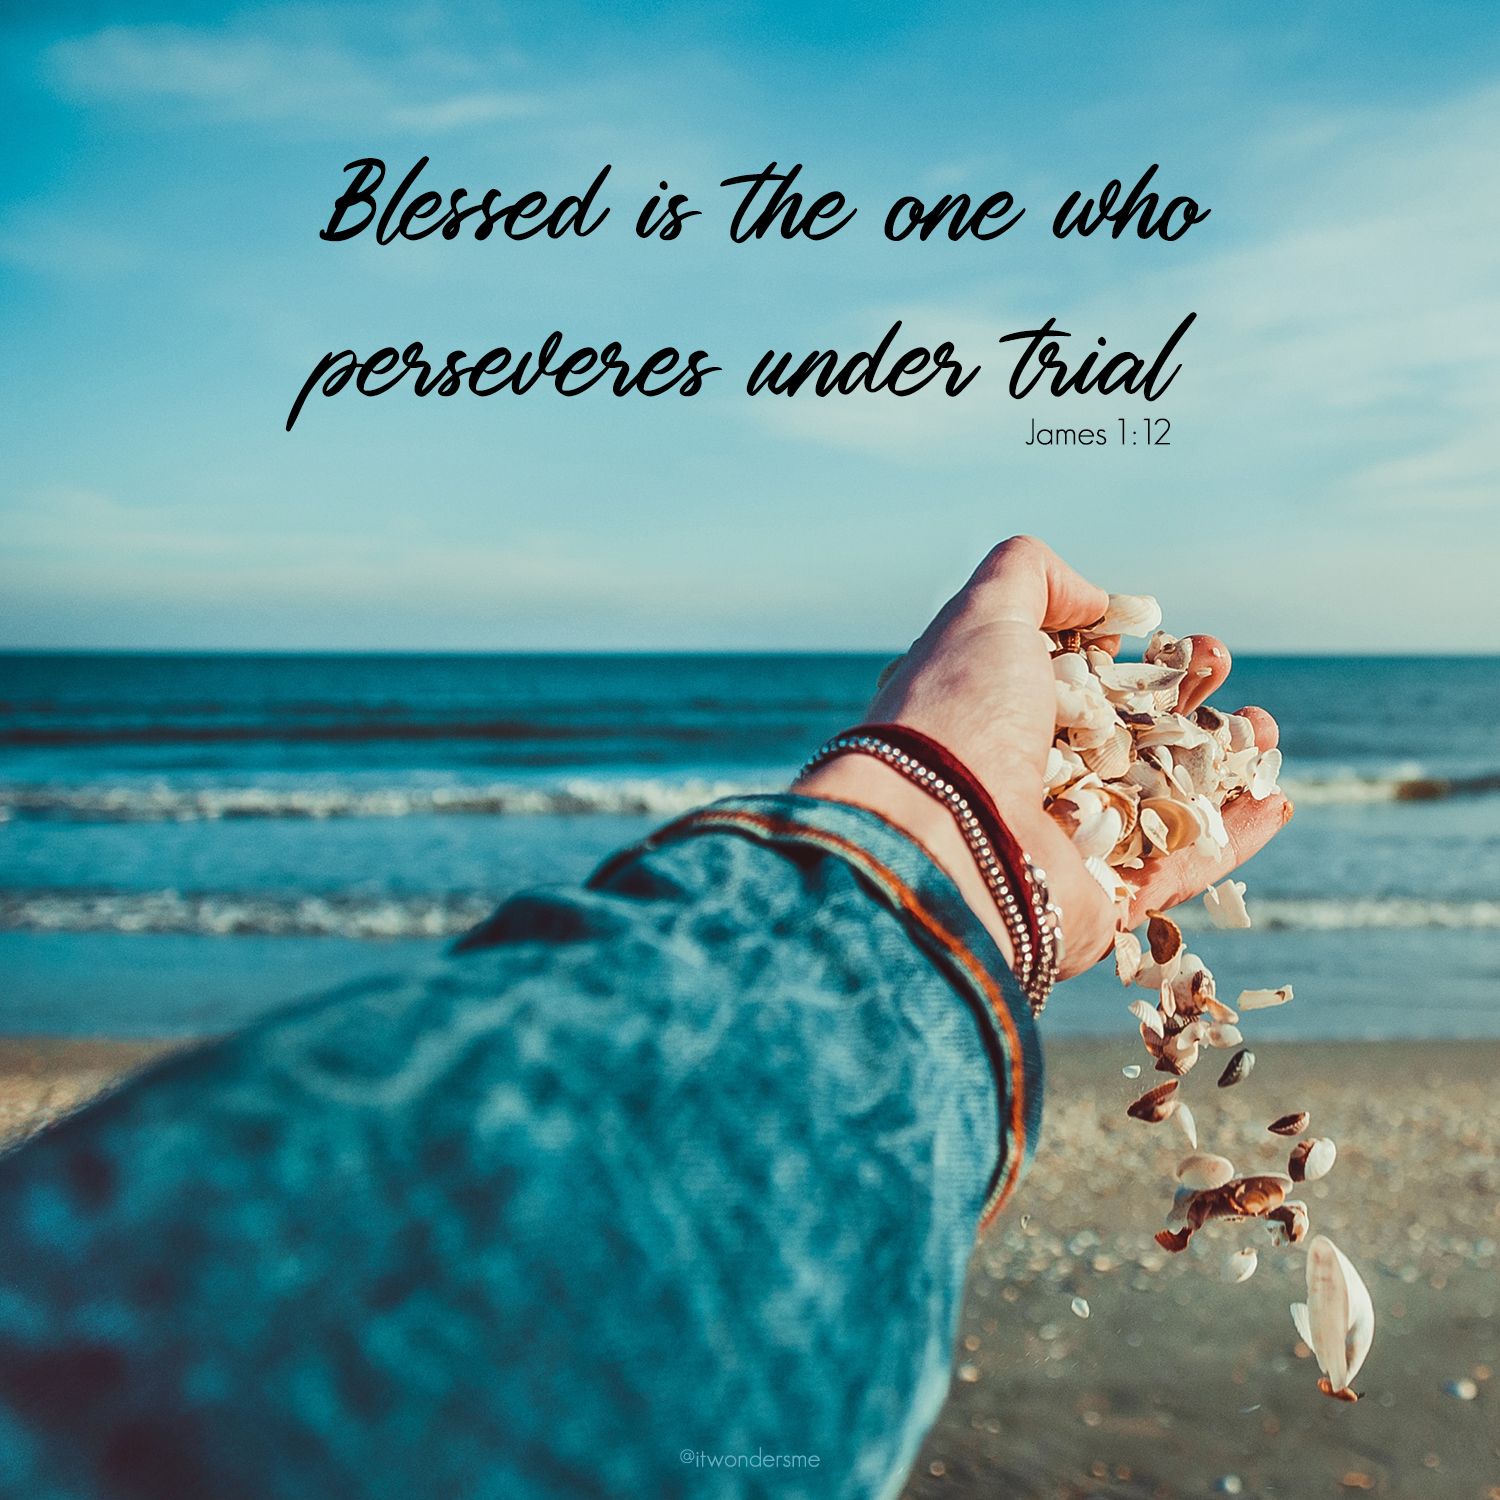 Blessed is the one who perseveres under trail